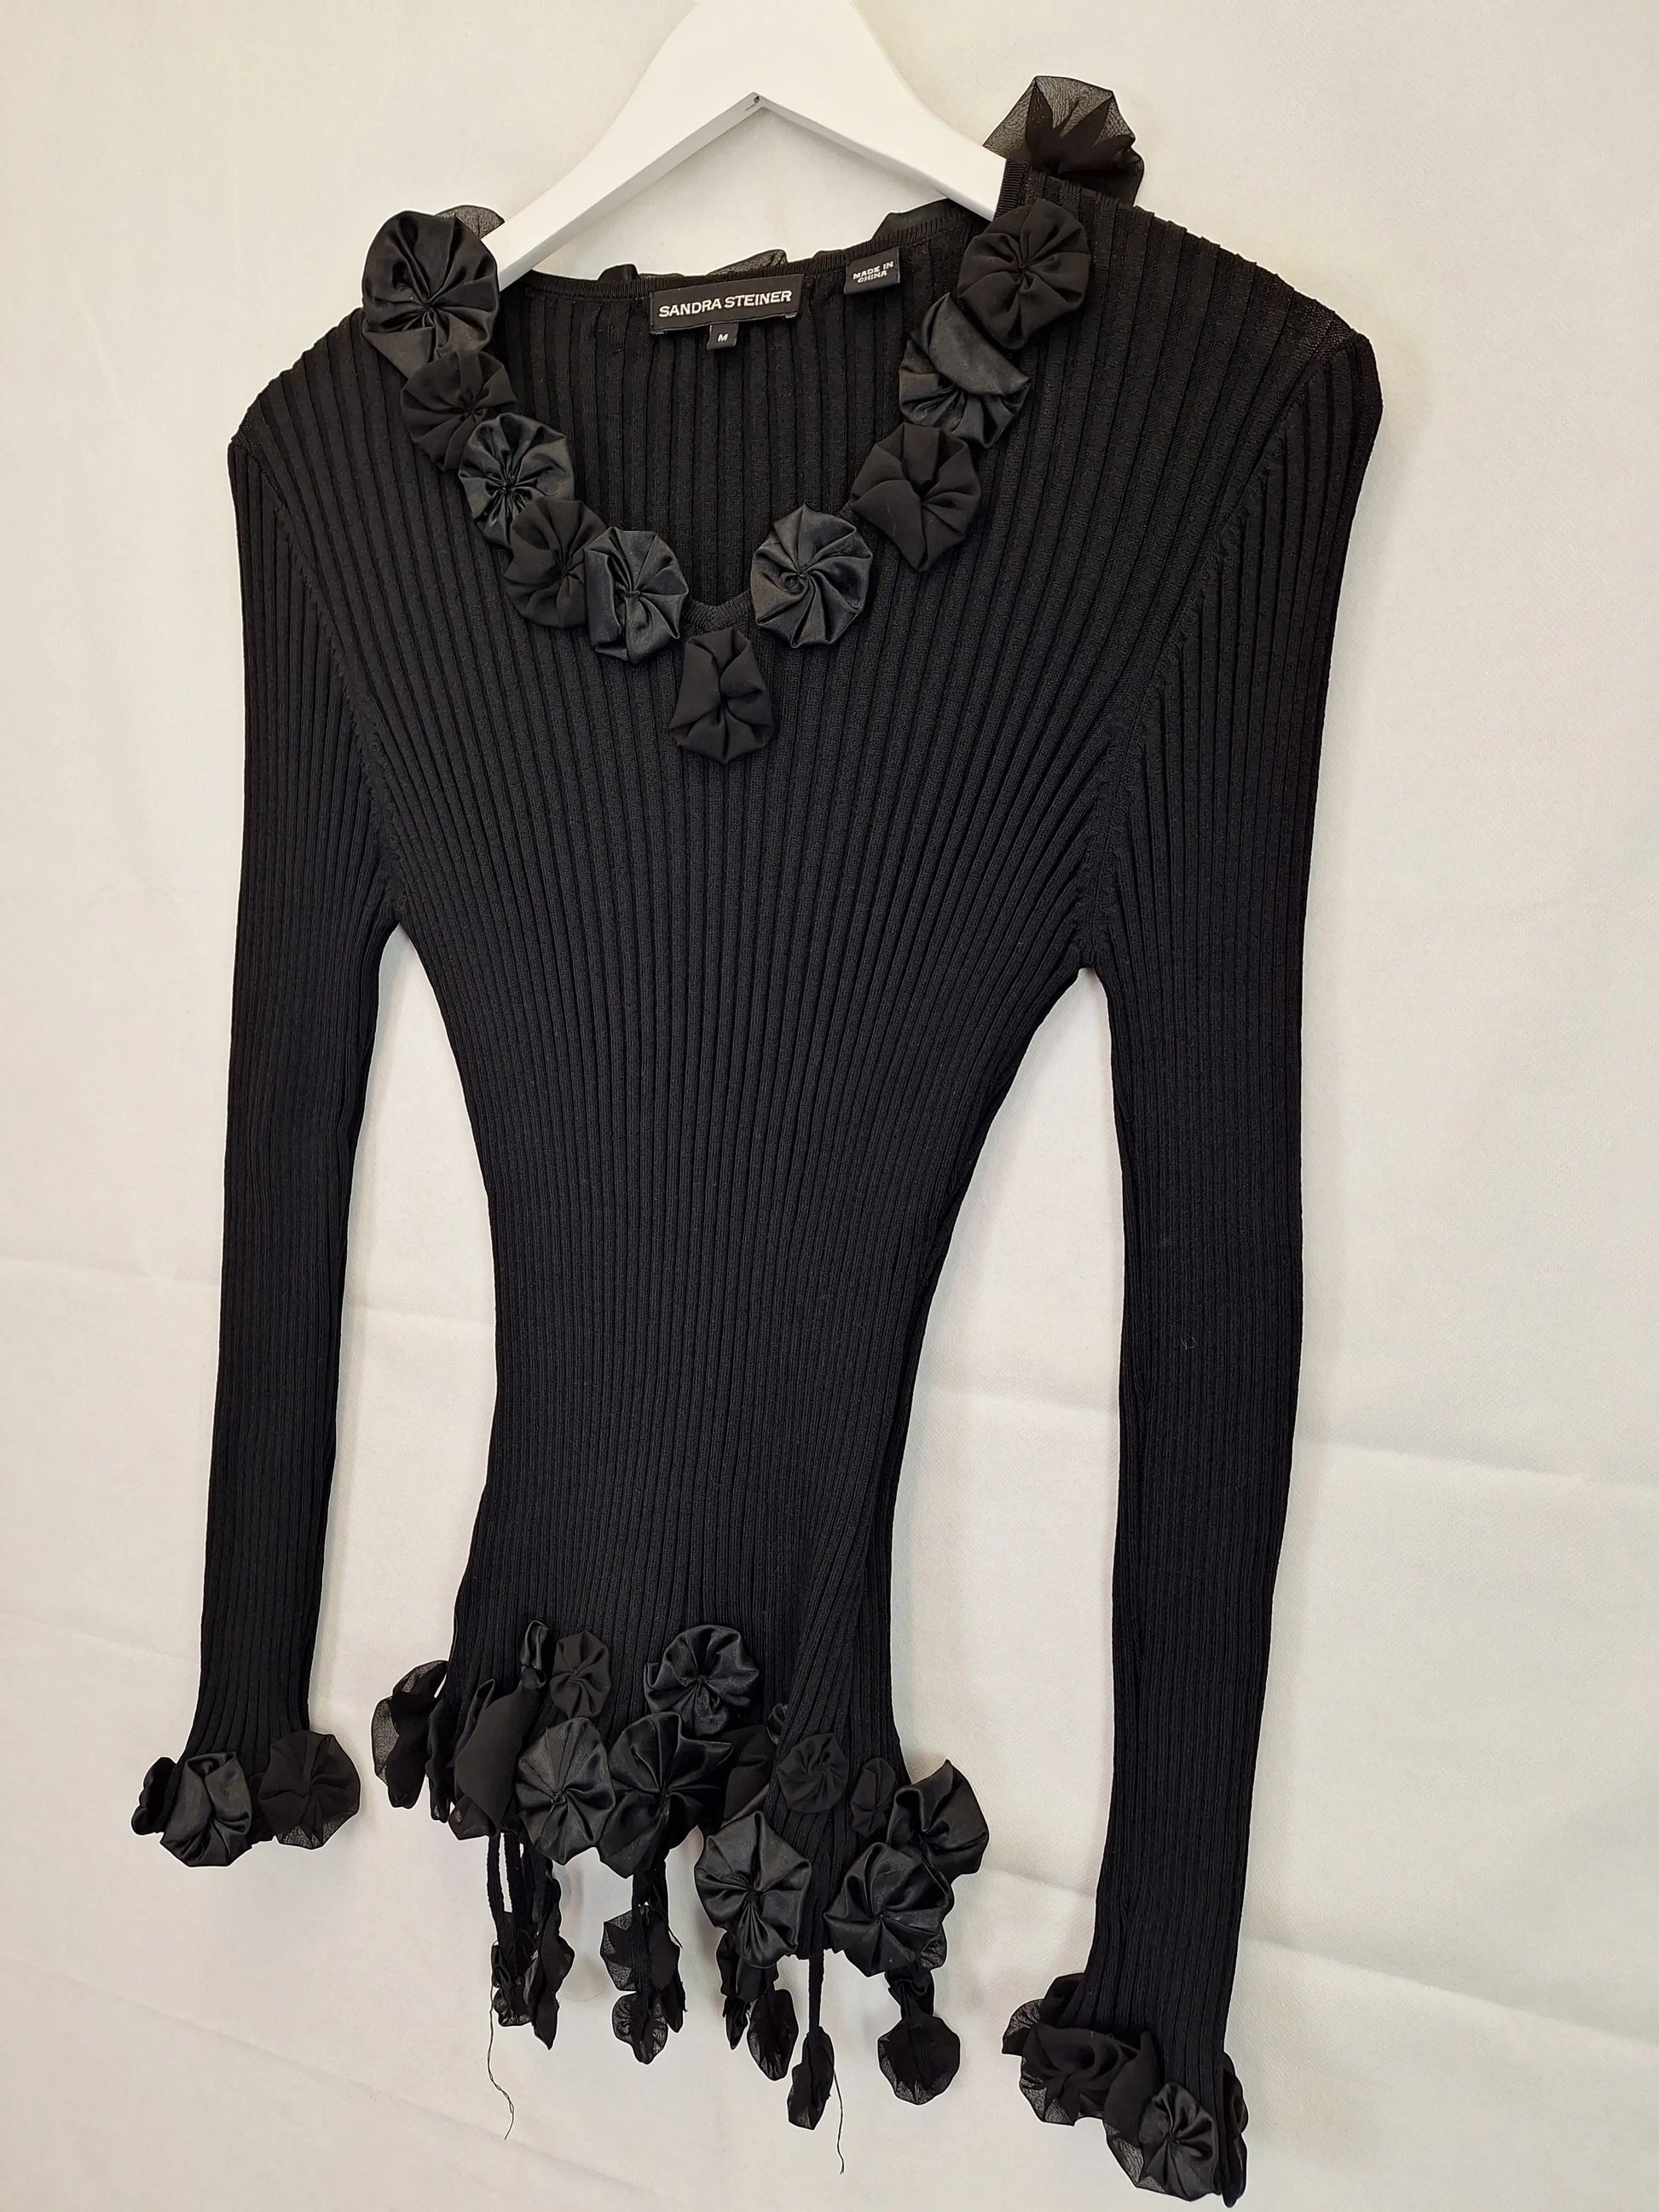 Sandra Steiner Rib Knit Embellished With Fabric Florals Top Size M by SwapUp-Online Second Hand Store-Online Thrift Store